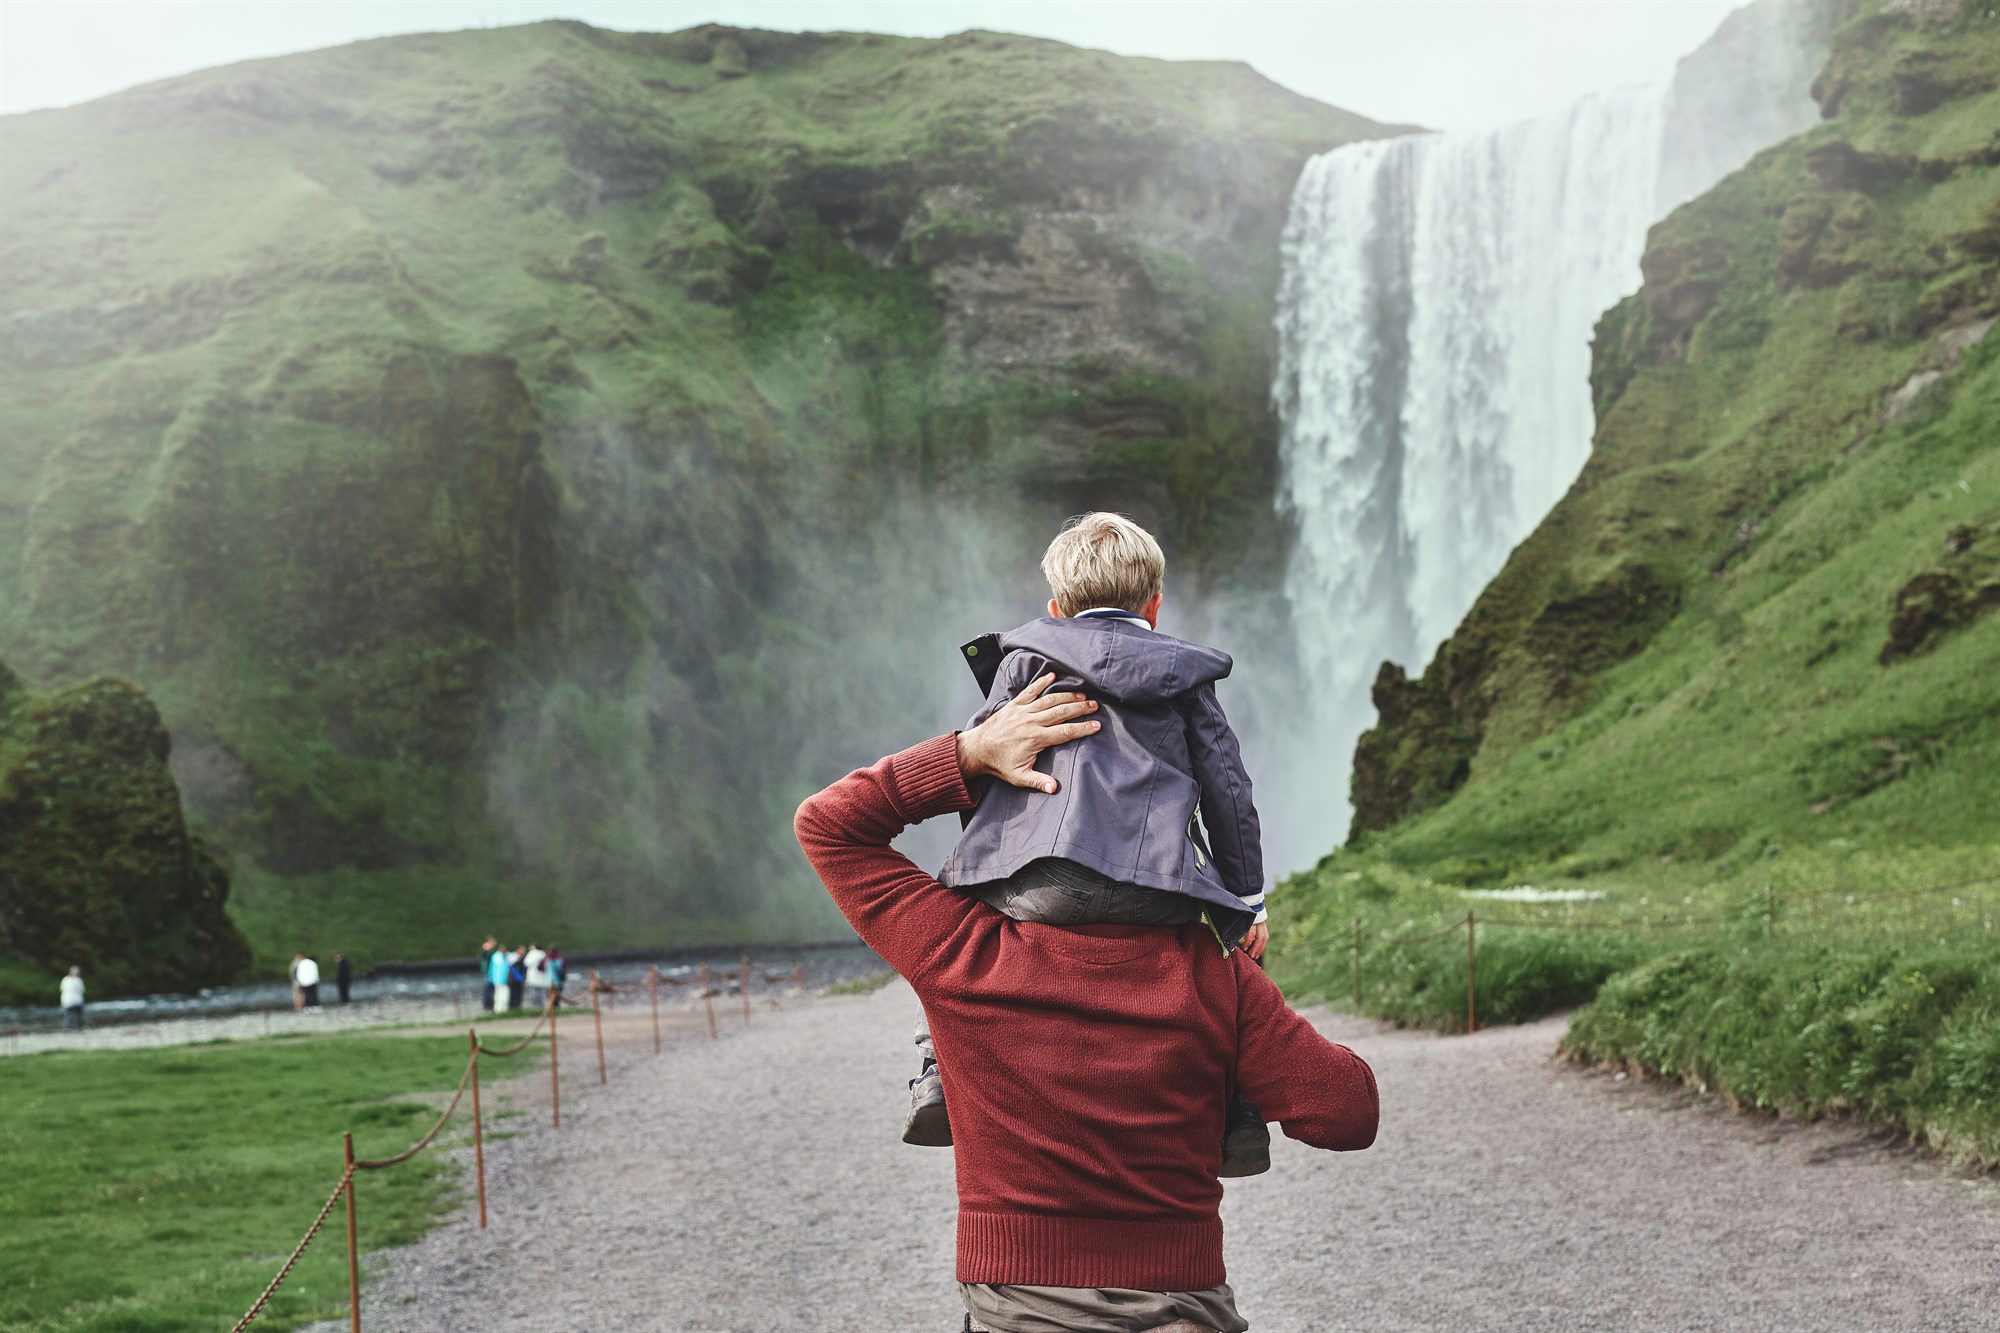 Father and son at Skogarfoss waterfall.